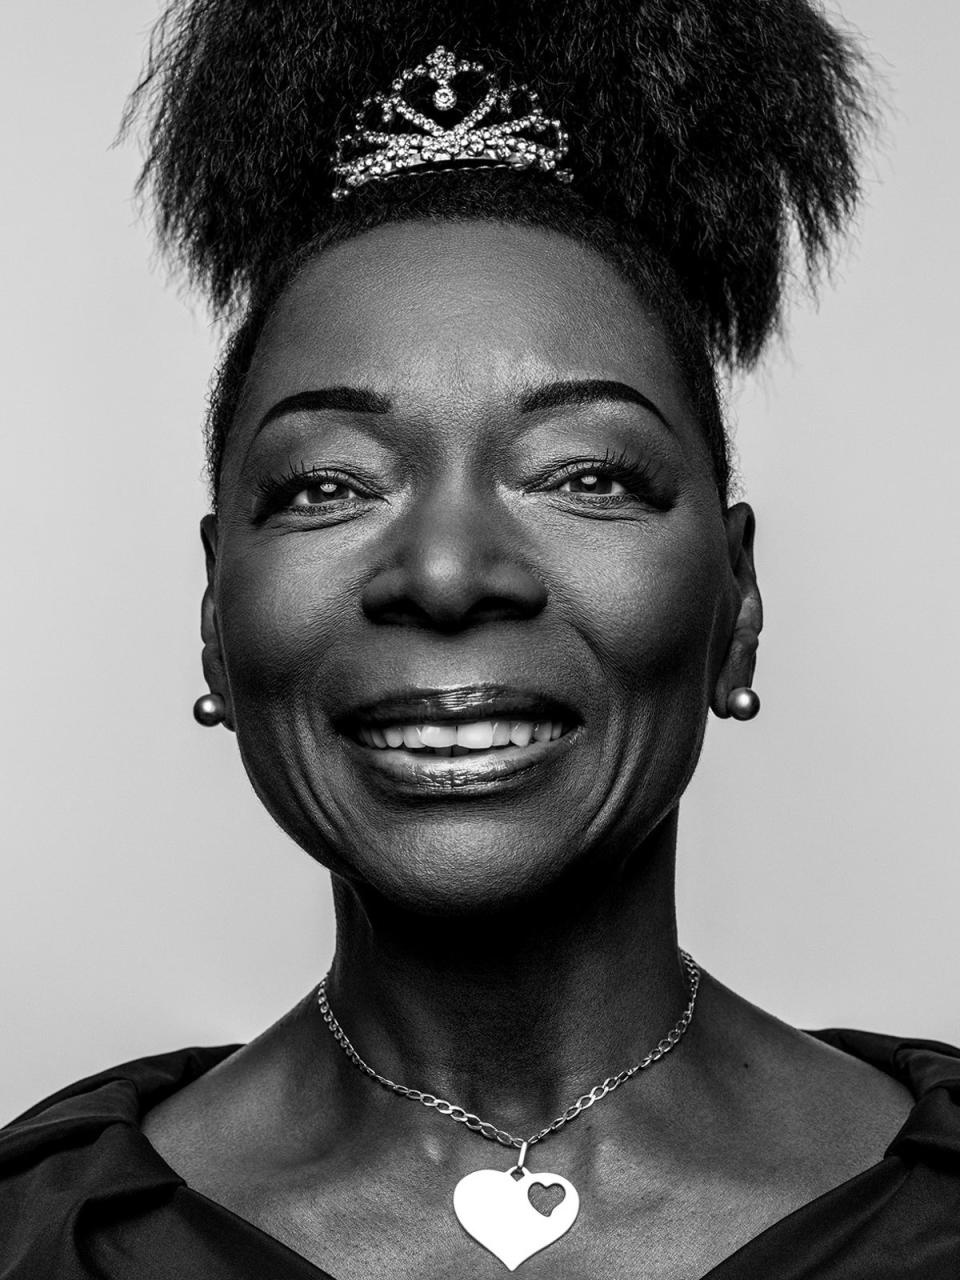 Baroness Floella Benjamin is on the list for her widespread campaigning (Sane Seven)